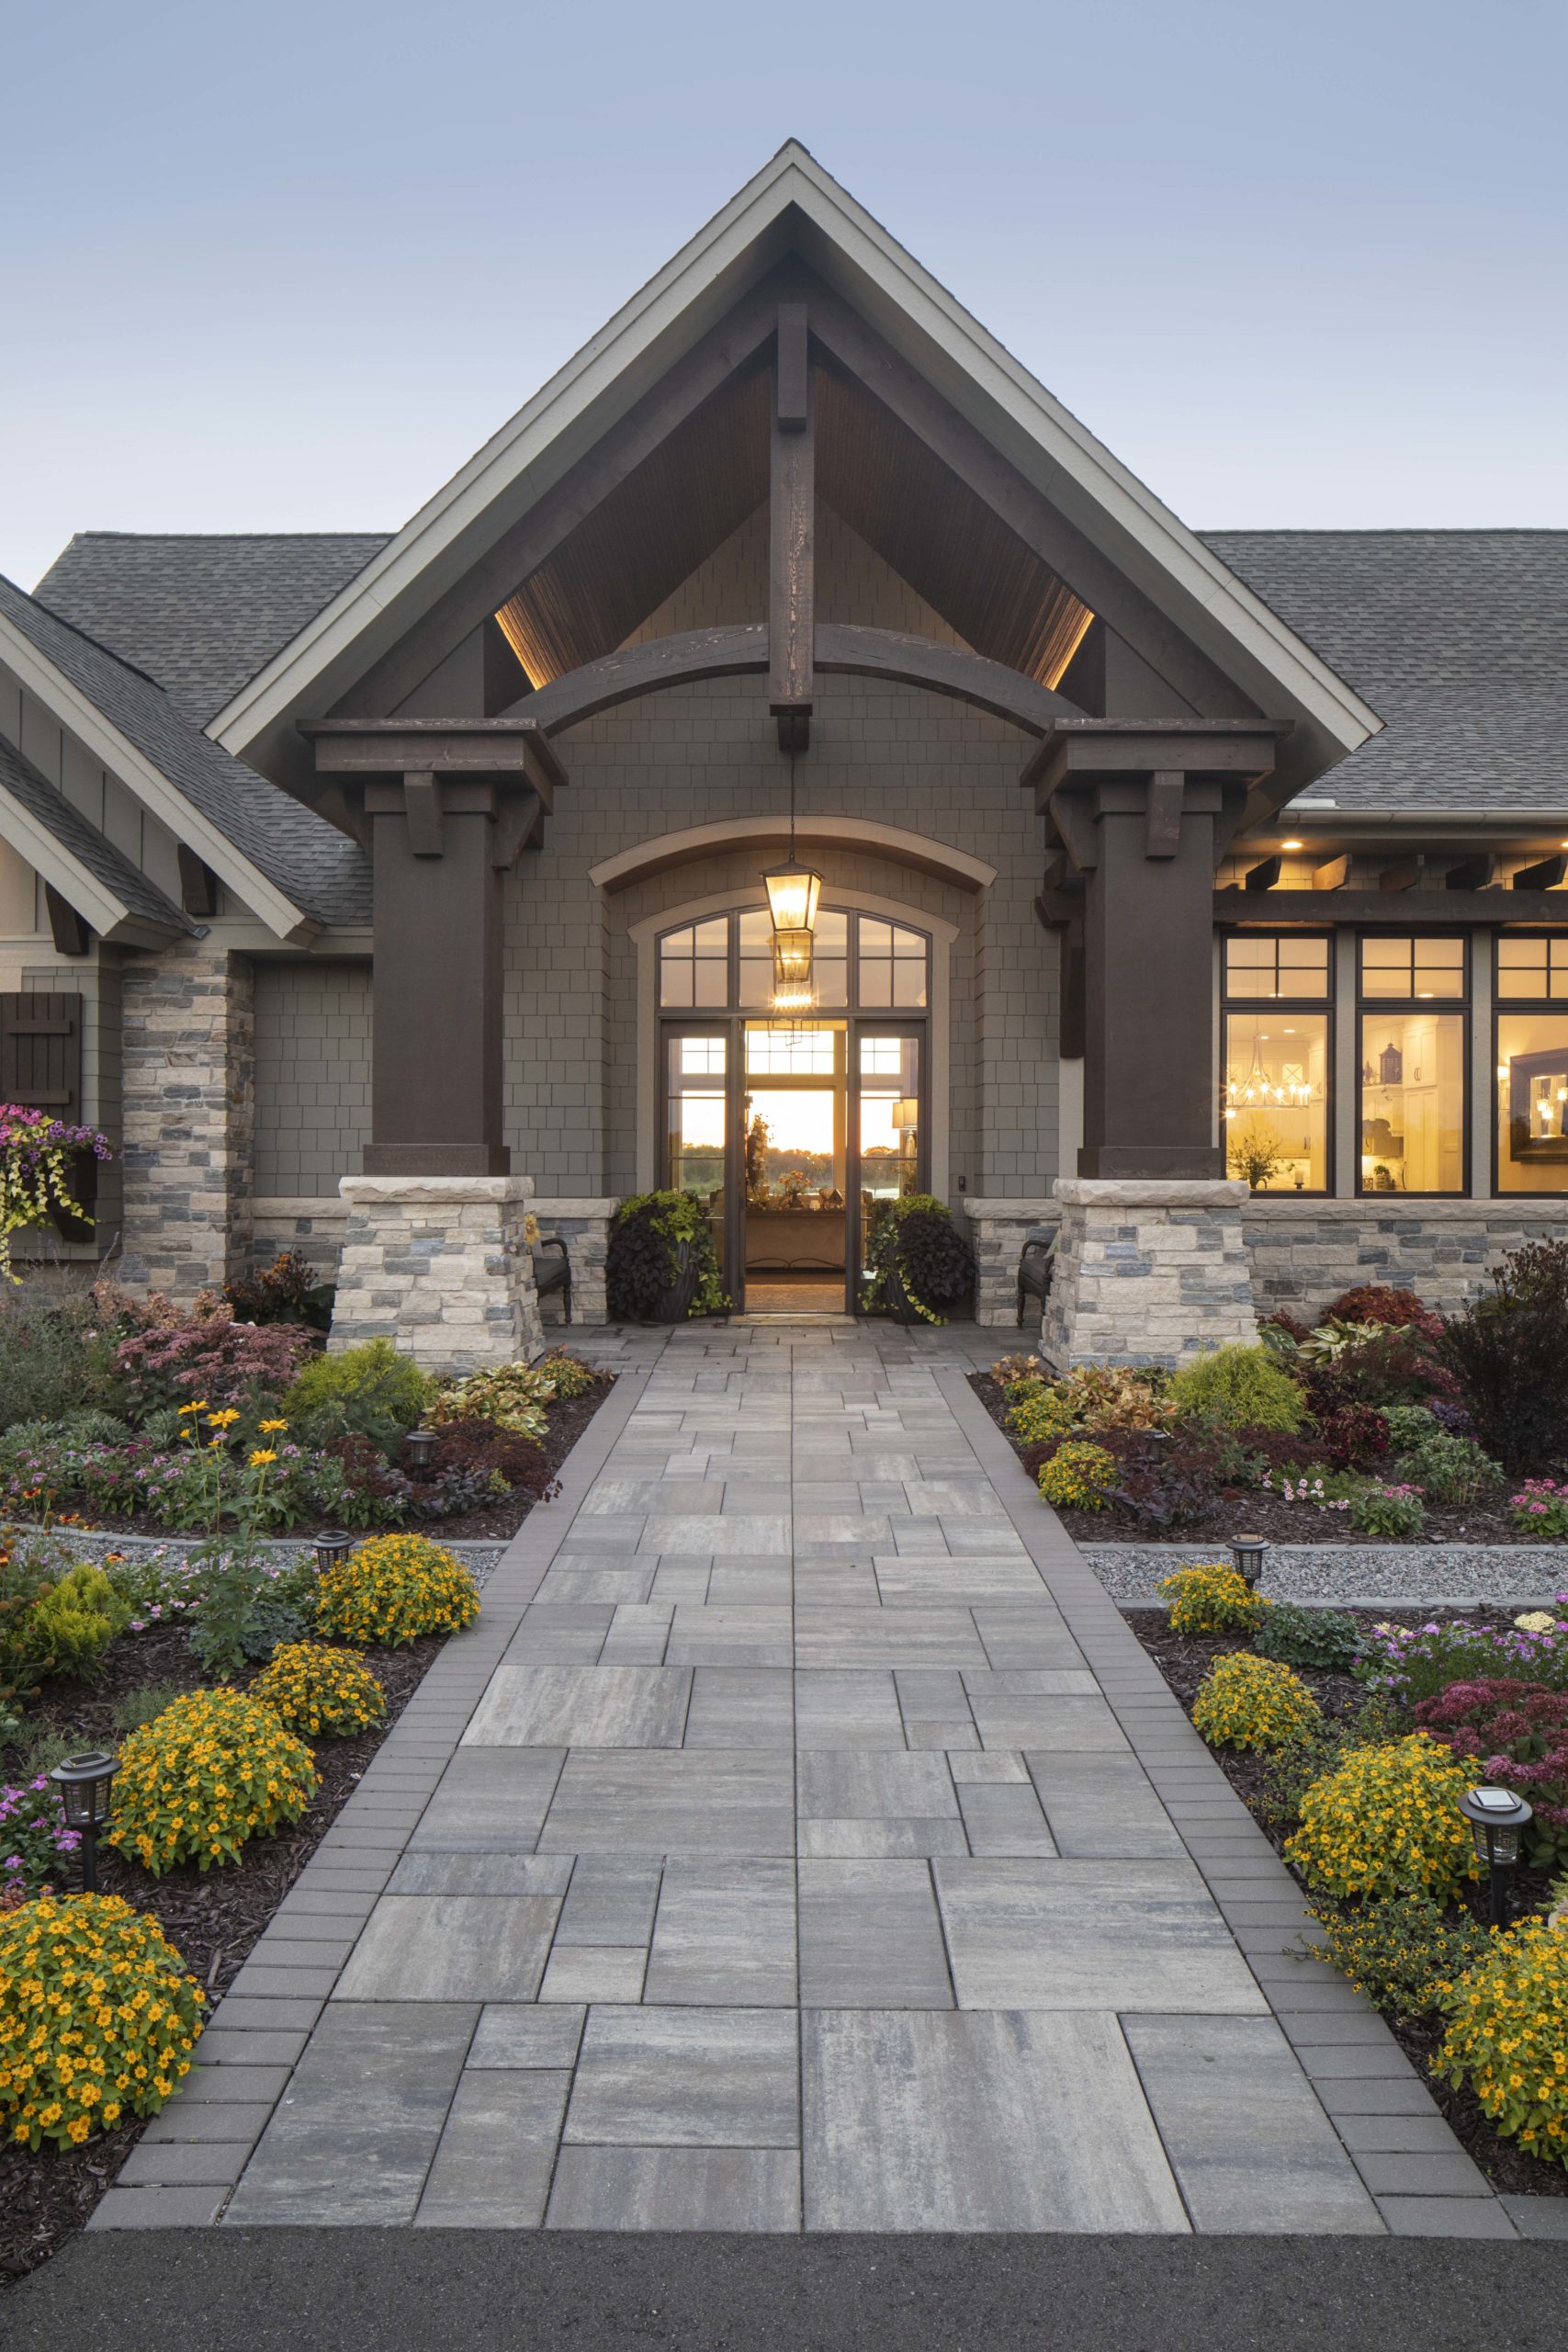 The entrance to a prairie transitional custom home with a walkway and landscaping.